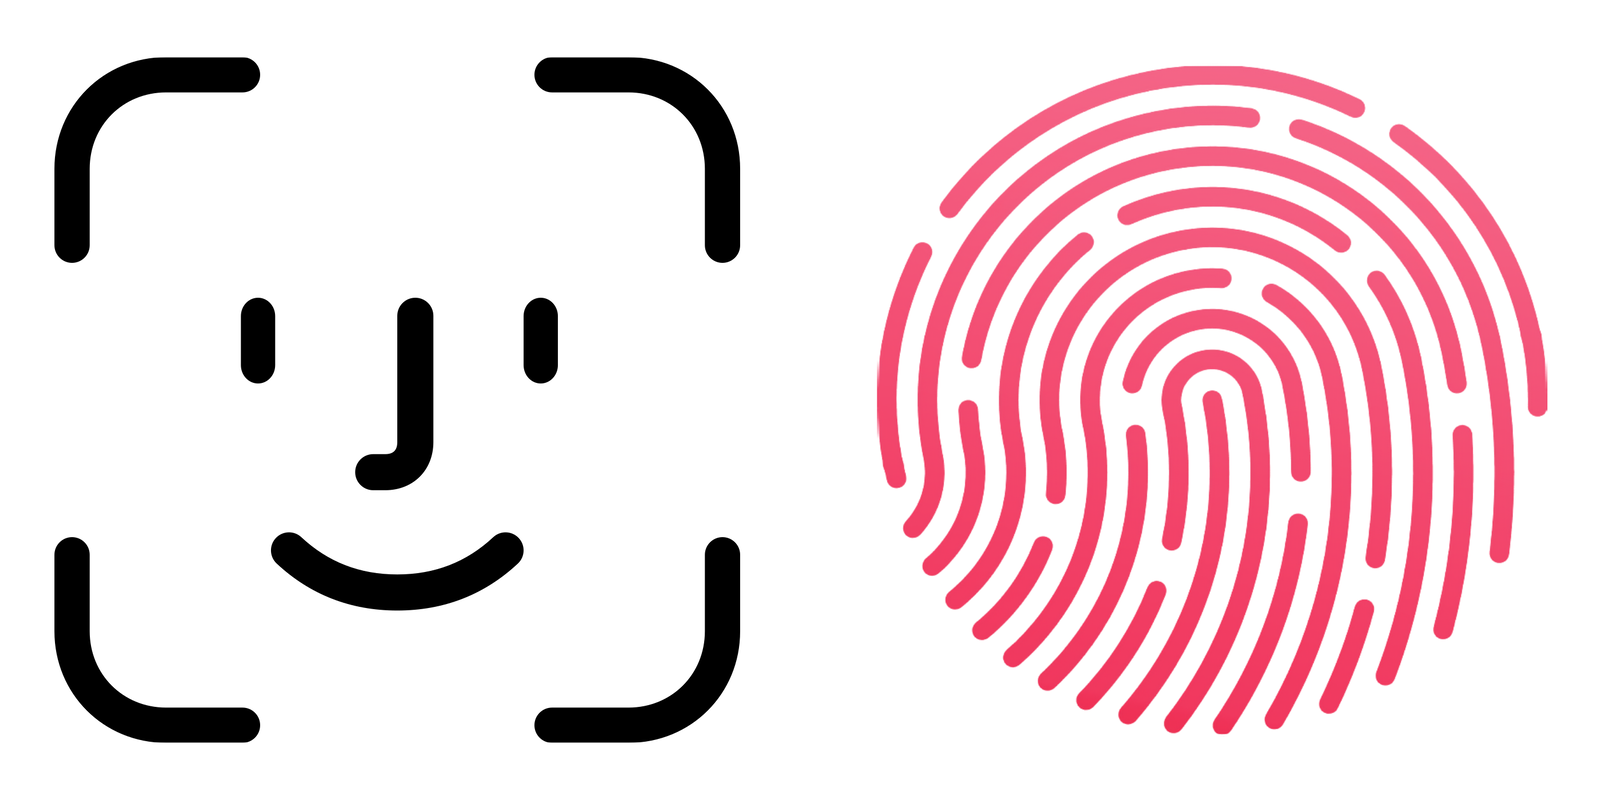 Is Face ID safer than passcode?